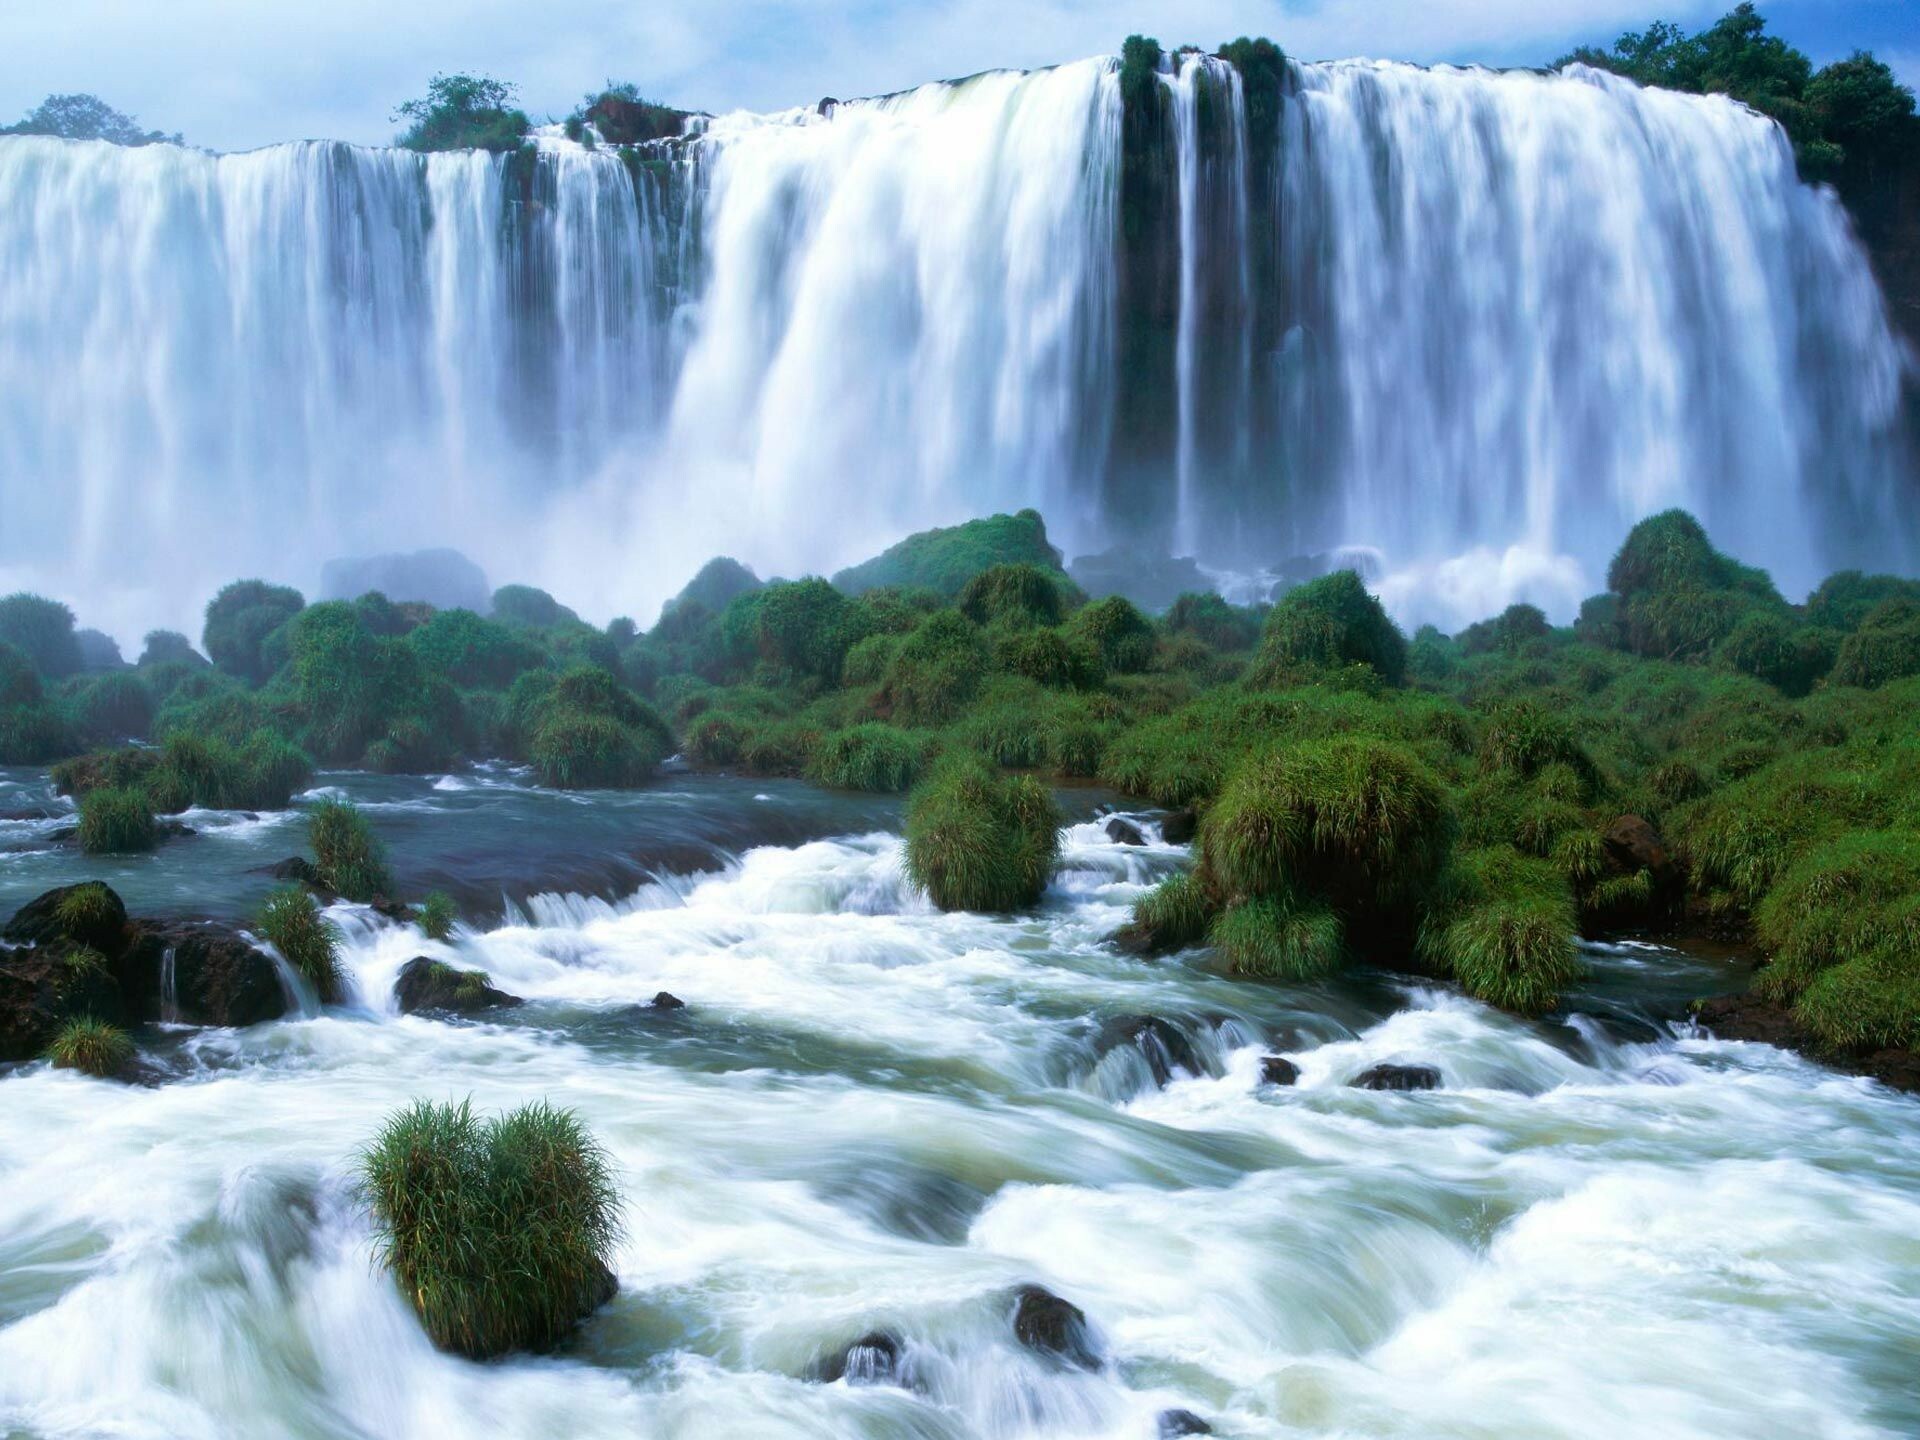 Victoria Falls: One of the most famous tourist sites in subsaharan Africa, Zambesi River. 1920x1440 HD Wallpaper.